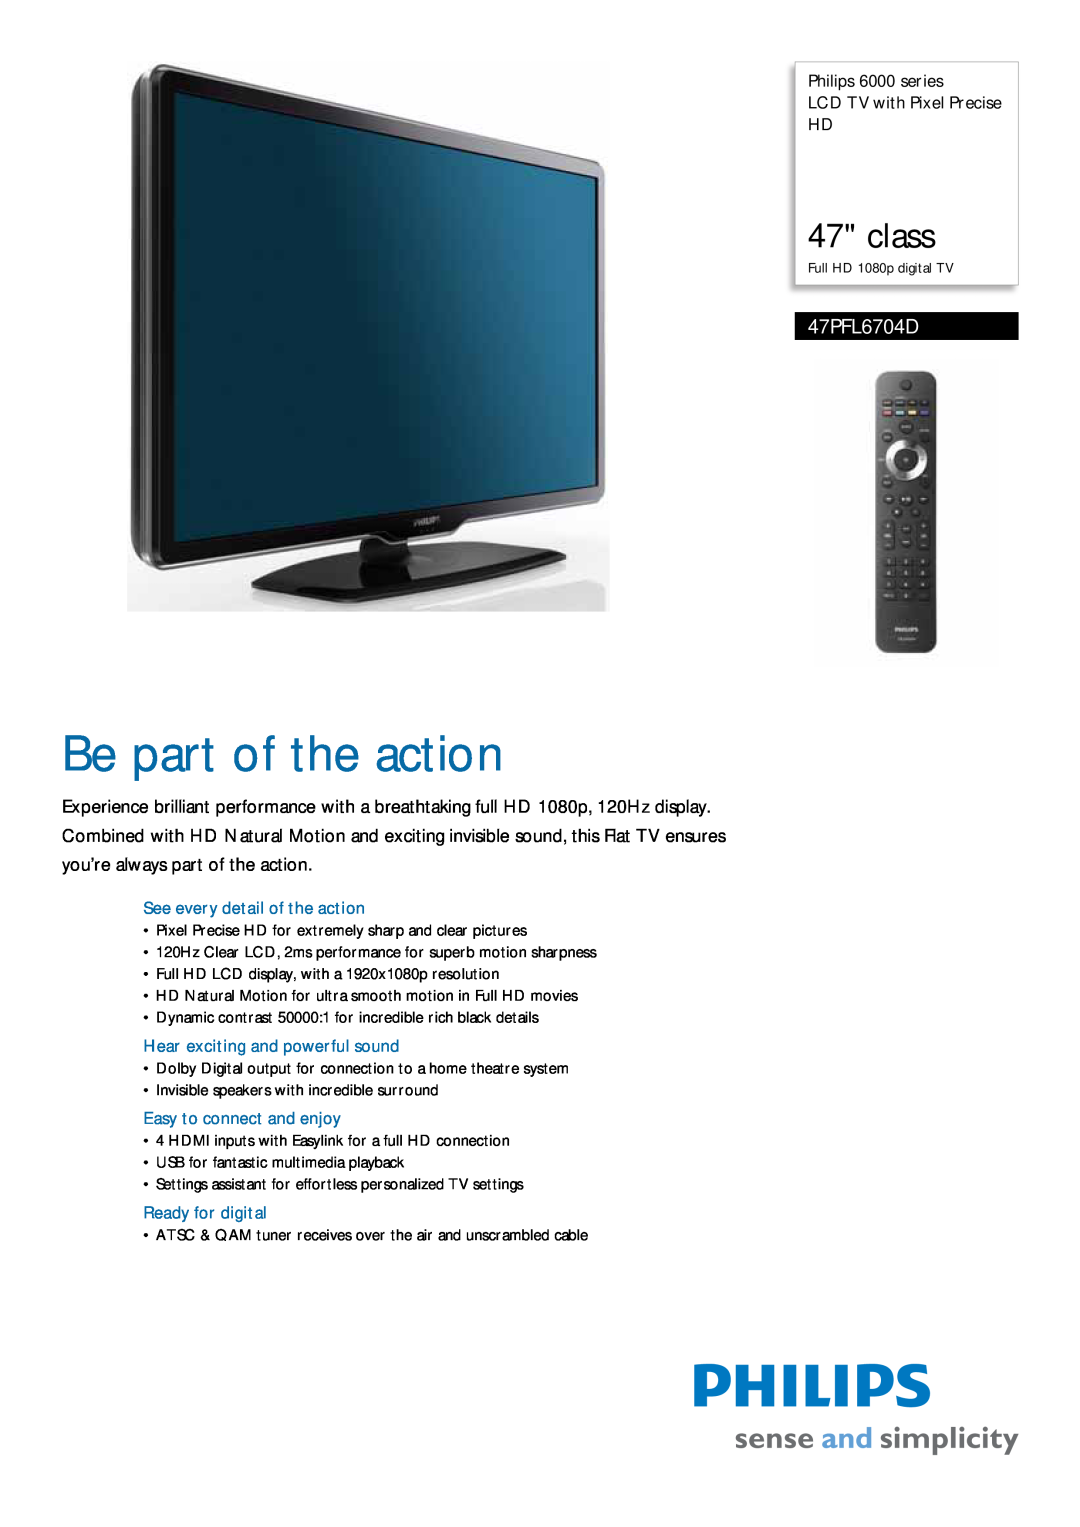 Radio Shack 47PFL6704D manual Philips 6000 series LCD TV with Pixel Precise HD, See every detail of the action, class 